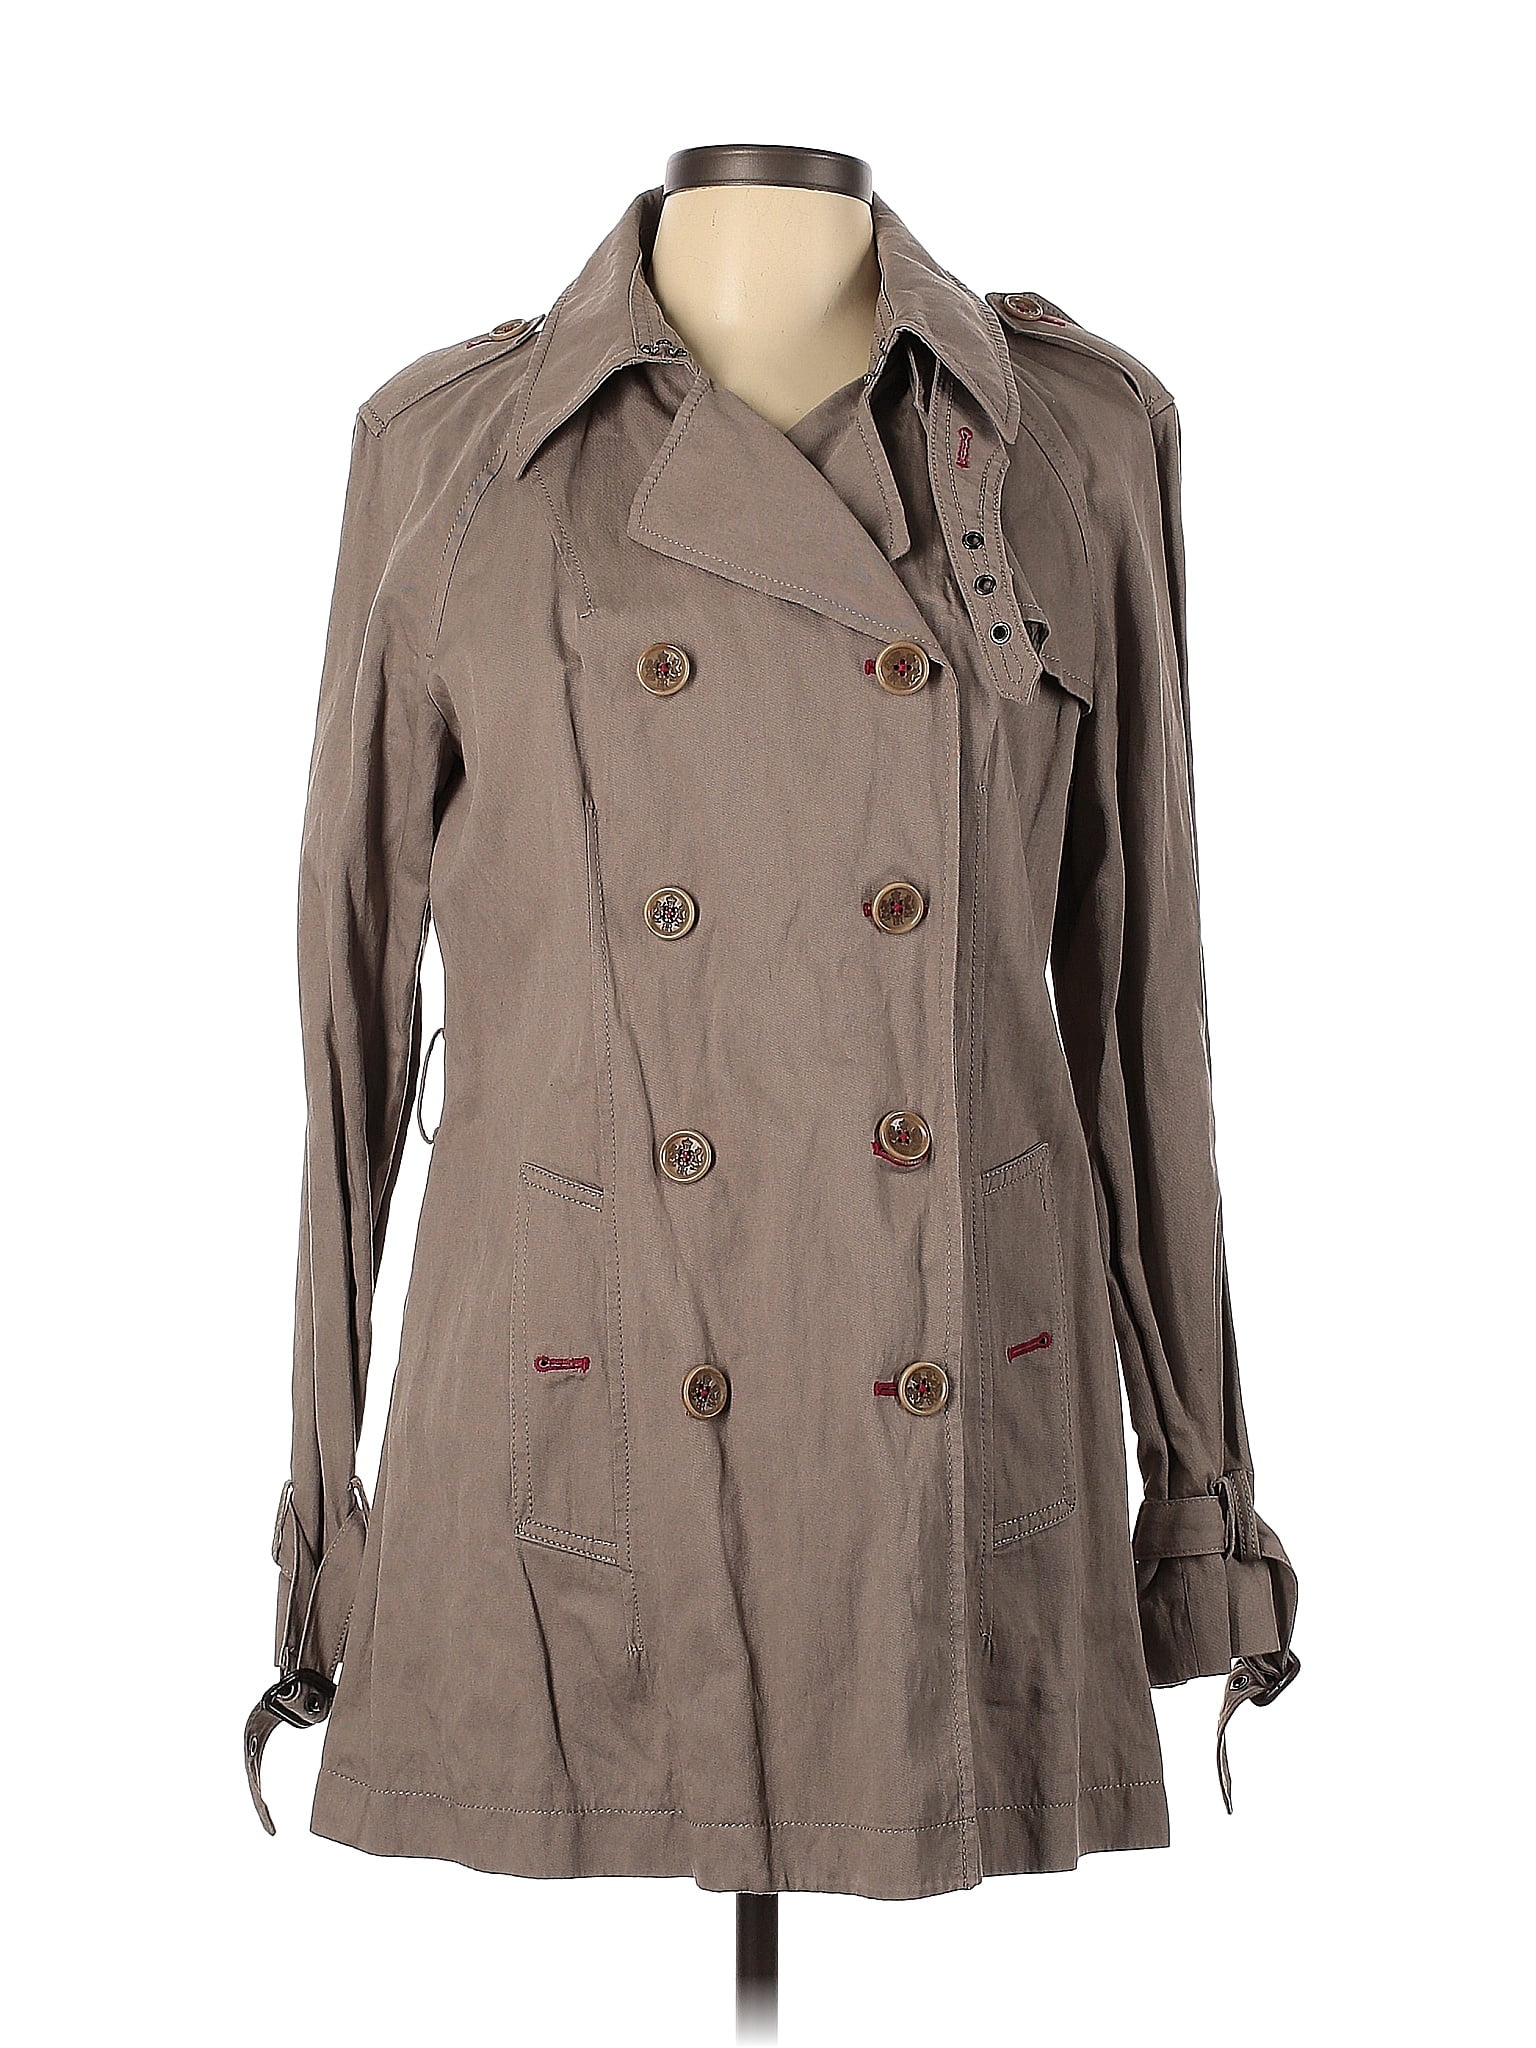 Banana Republic Heritage Collection Solid Brown Jacket Size L - 81% off ...